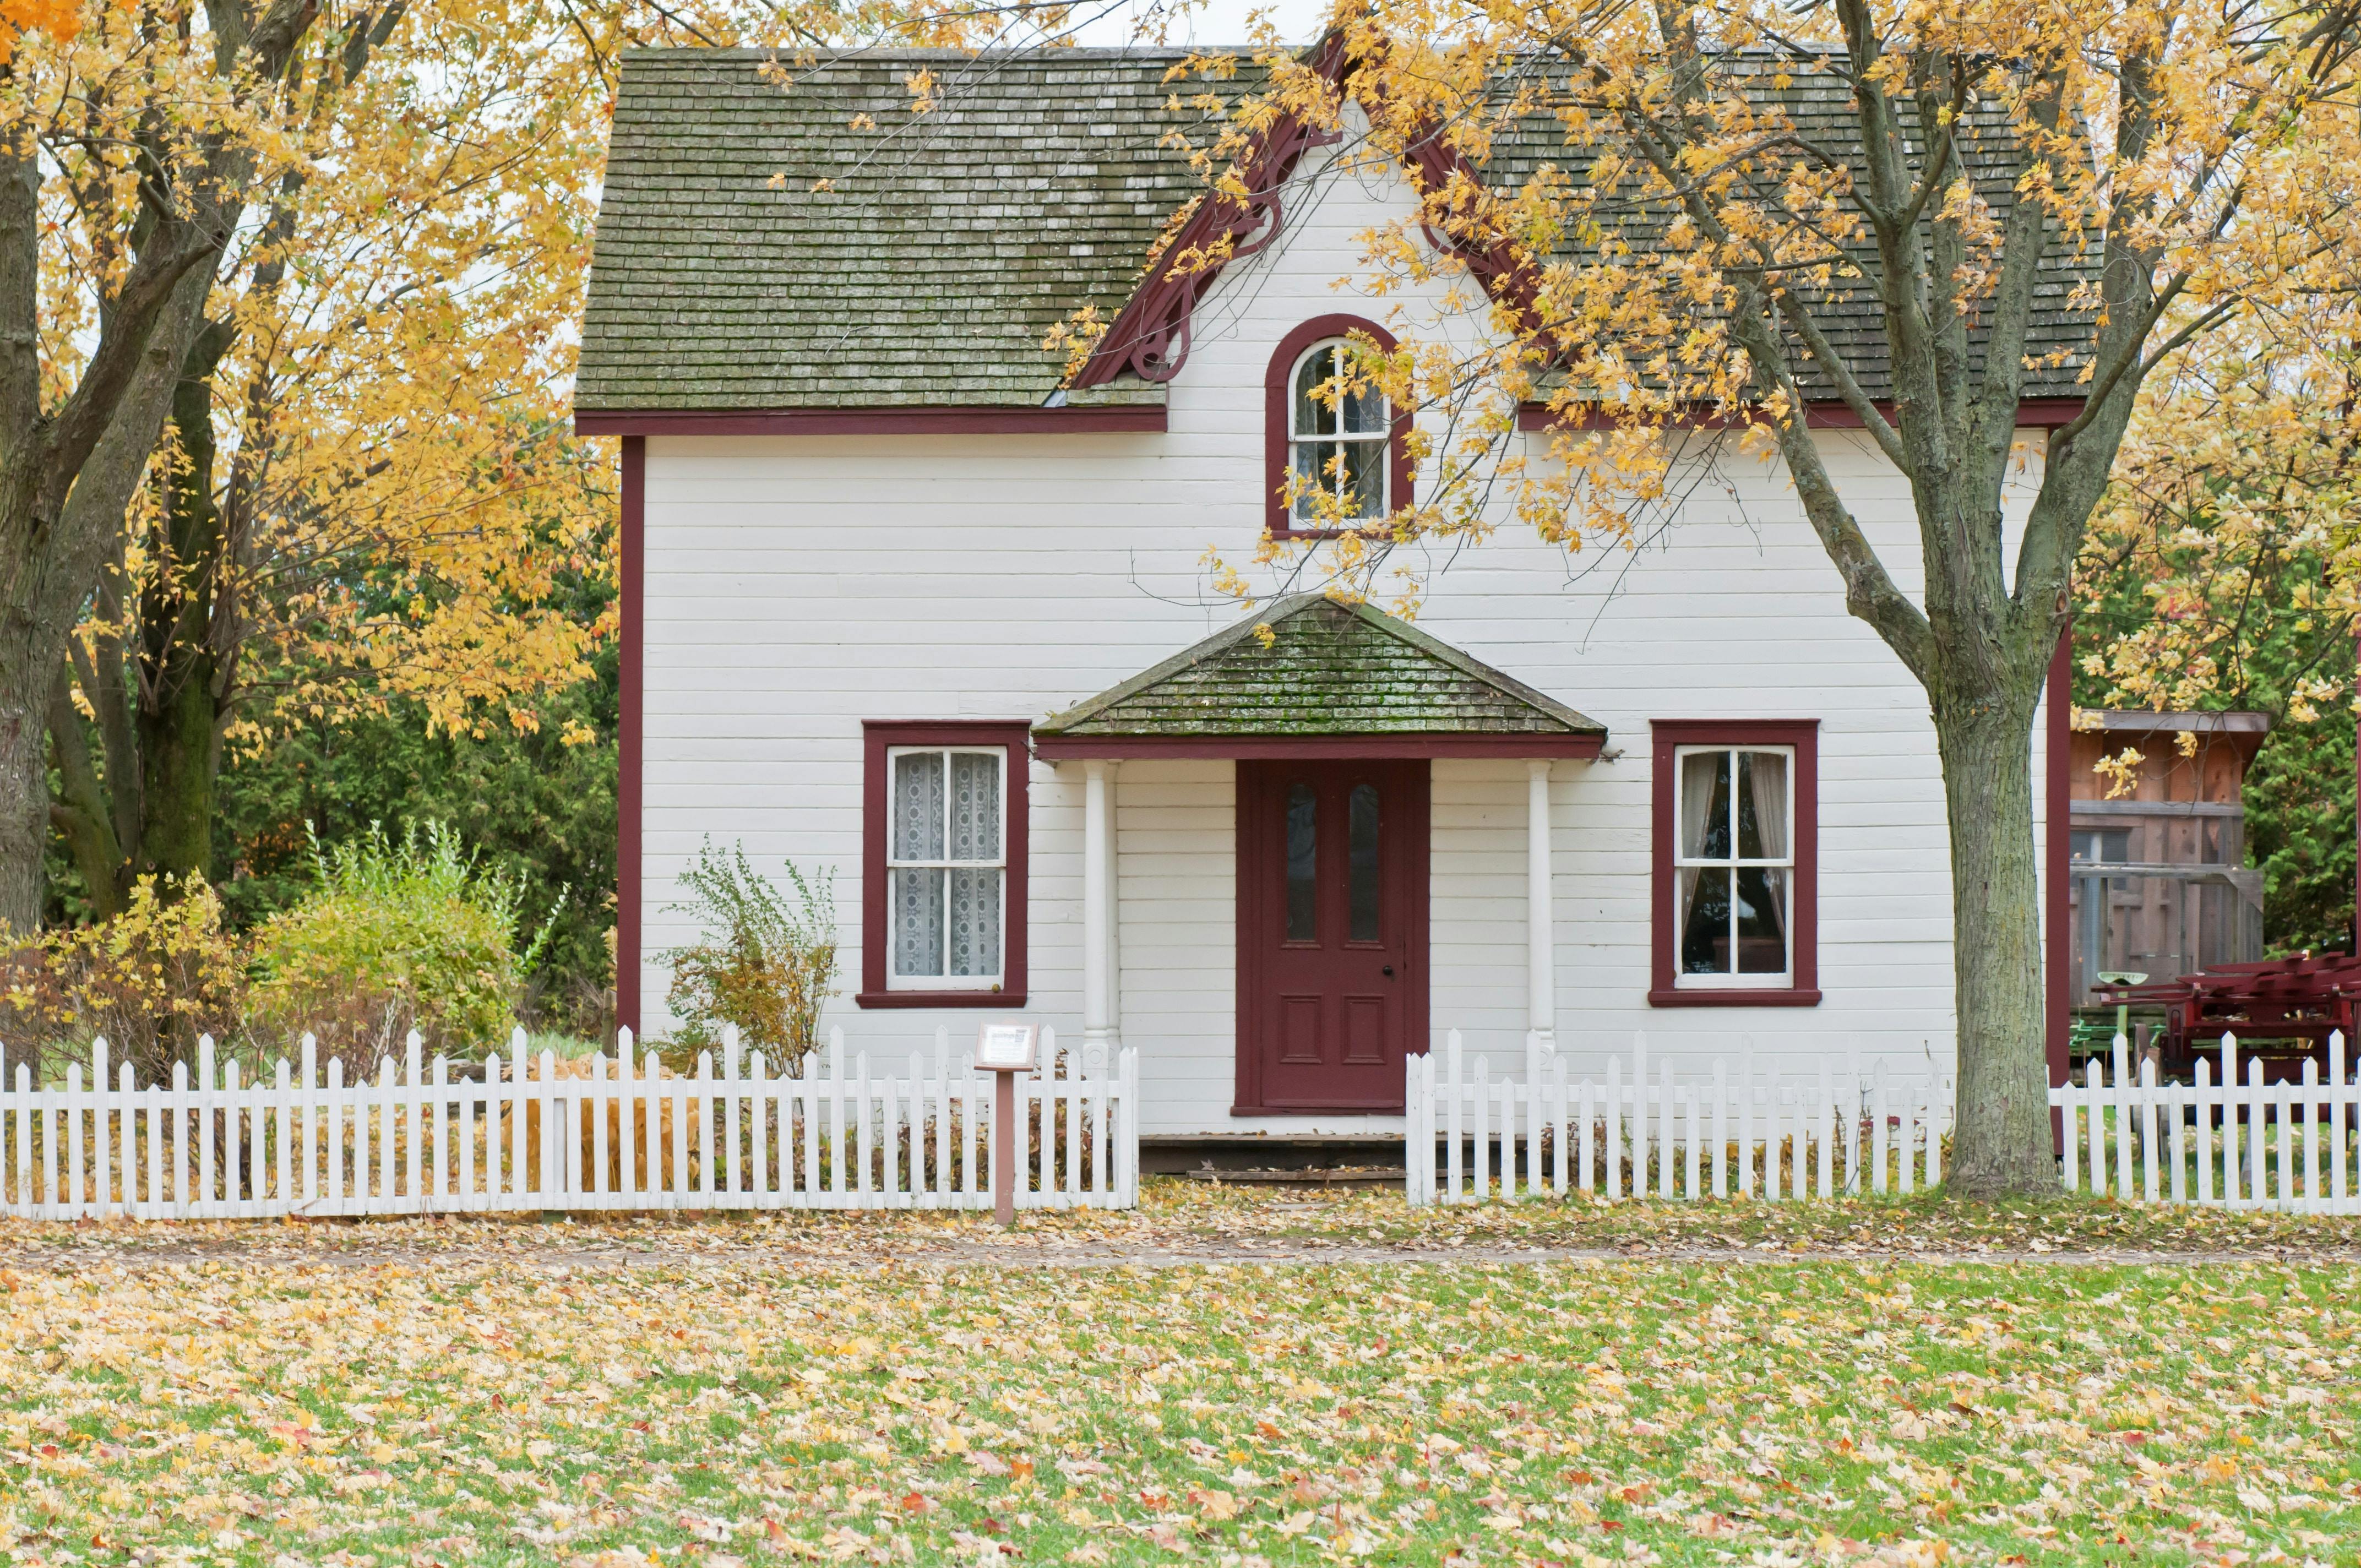 Small house | Source: Pexels